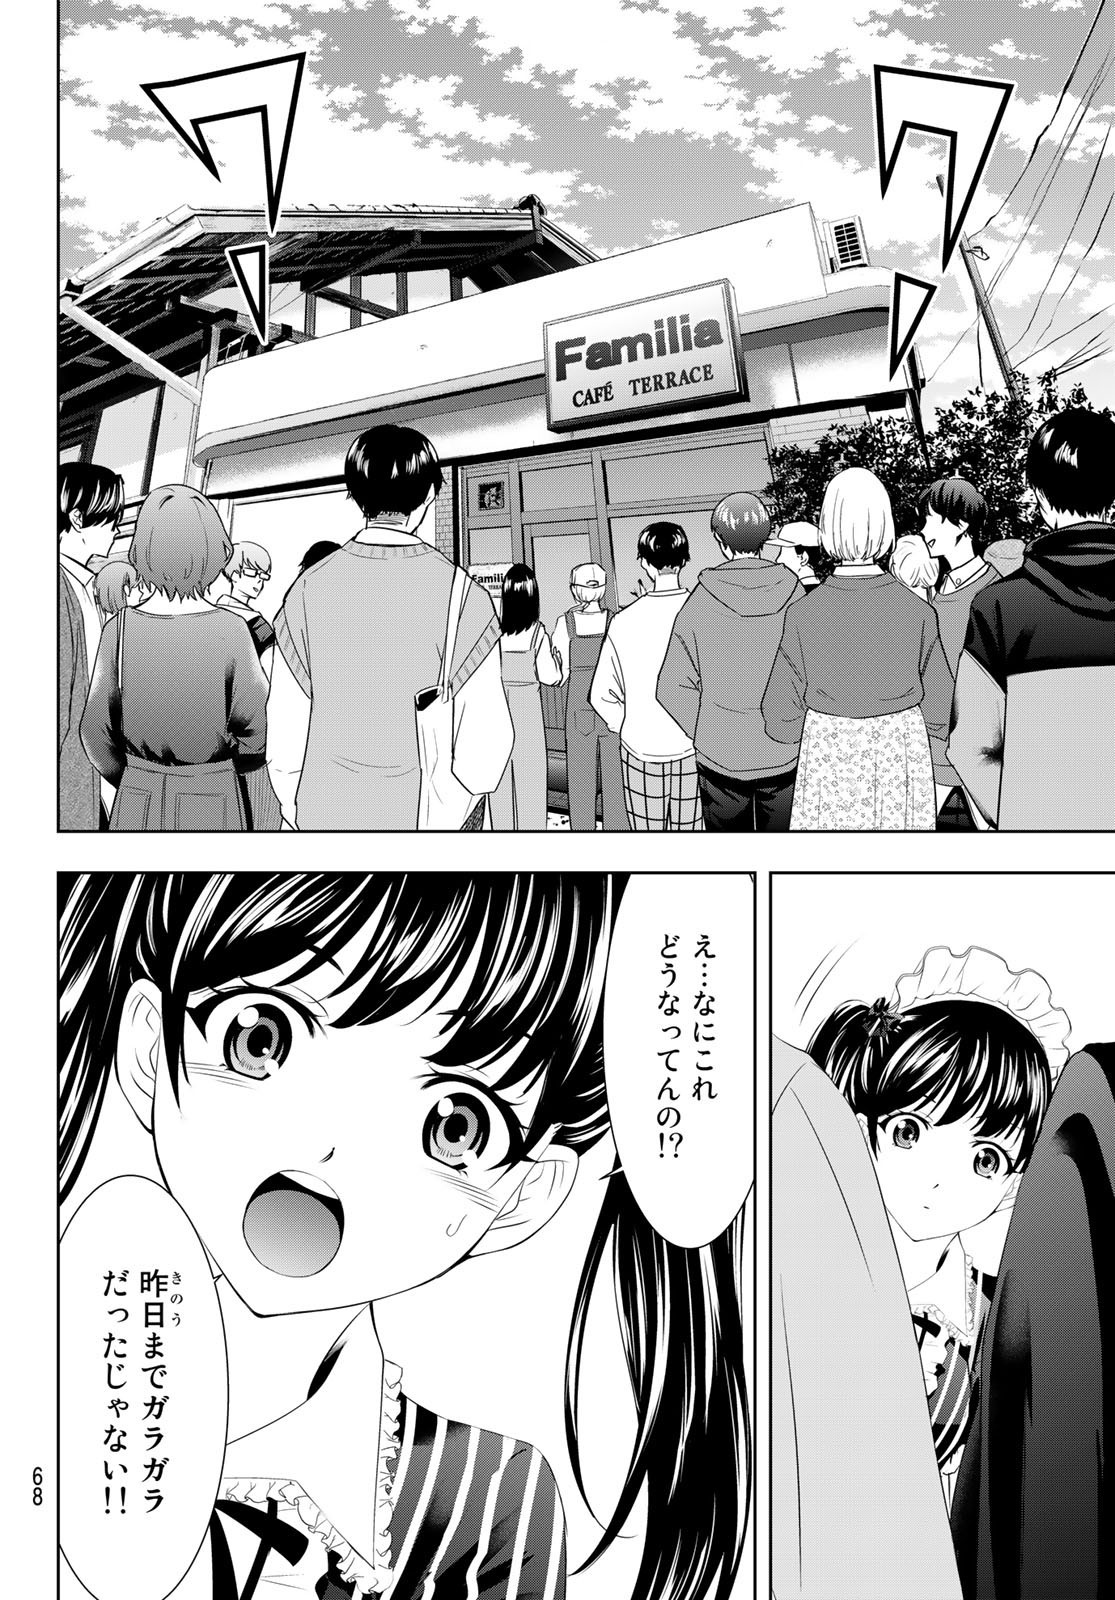 Goddess-Cafe-Terrace - Chapter 052 - Page 12